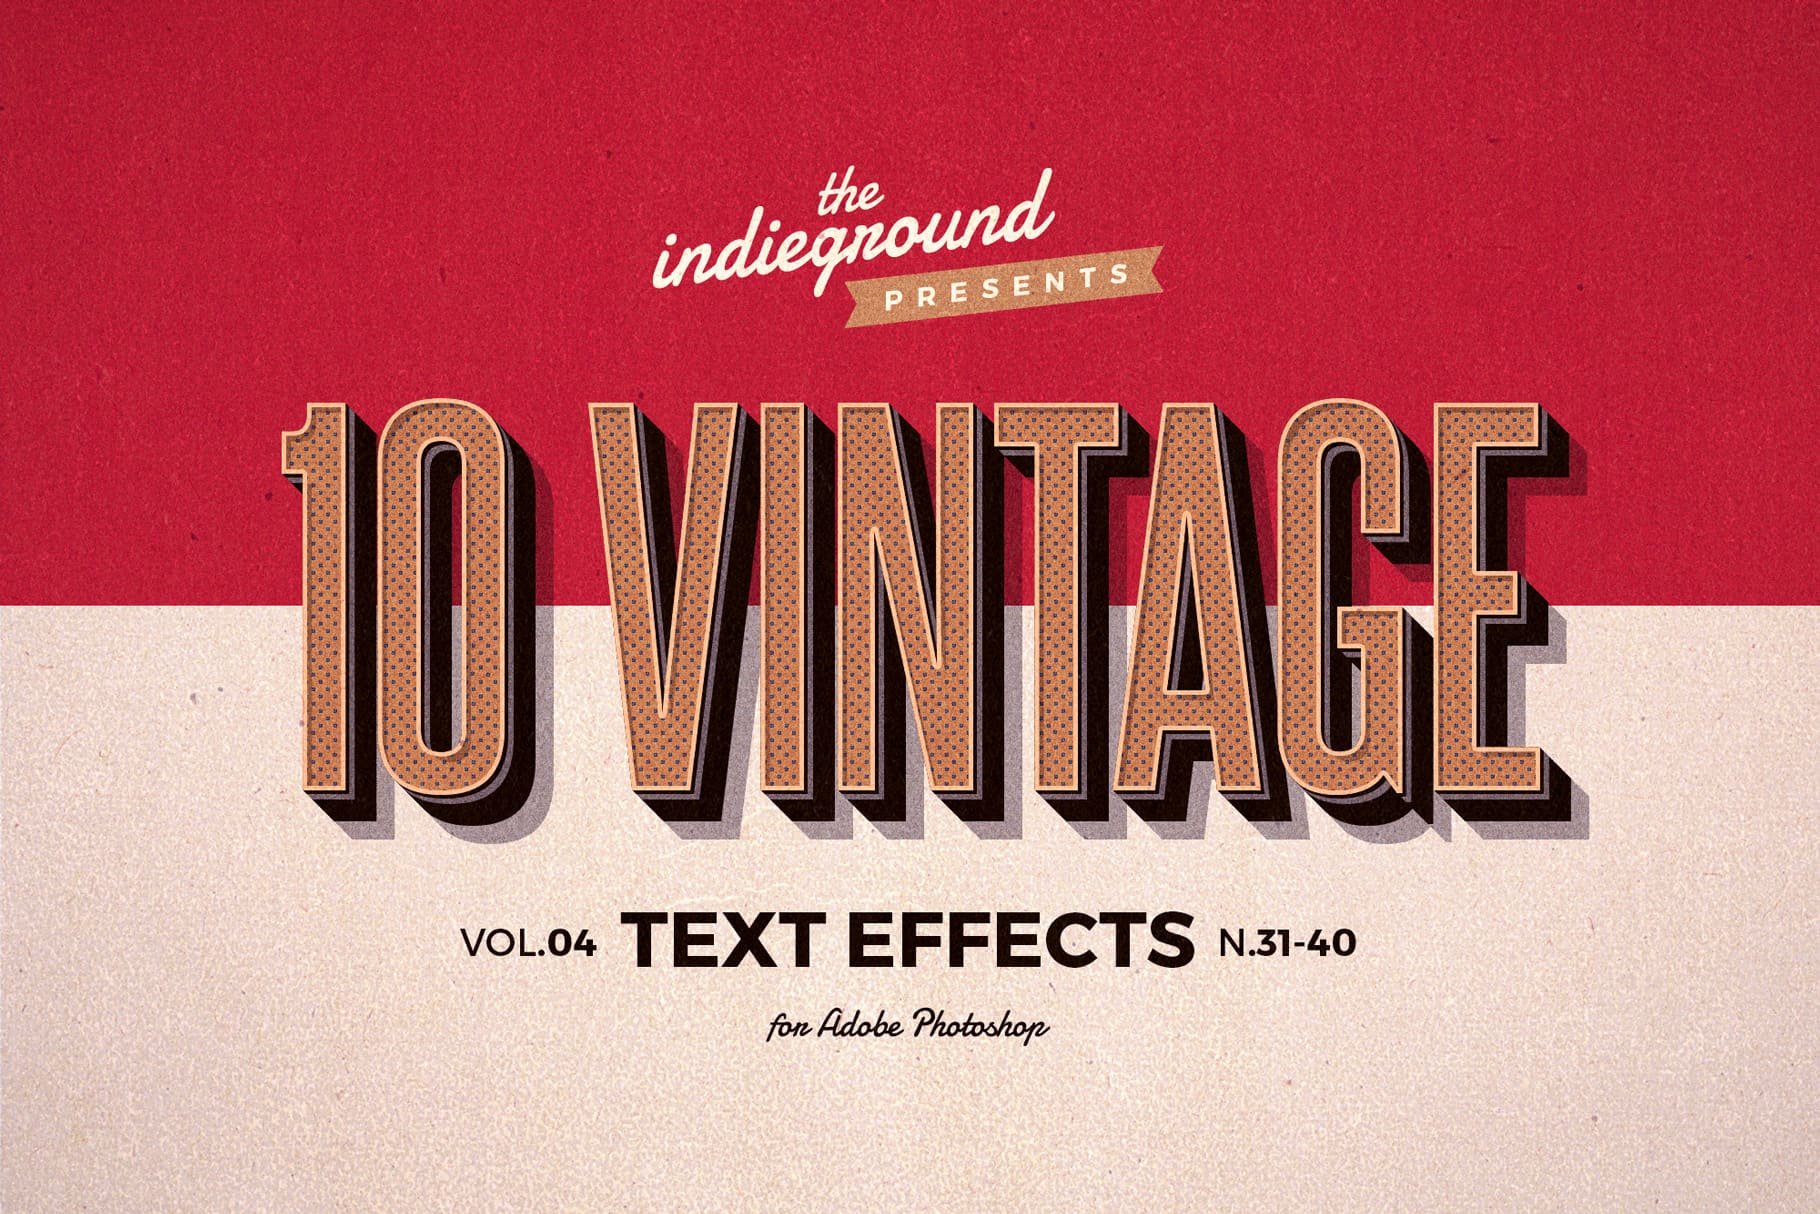 Retro Text Effects Vol.4cover image.